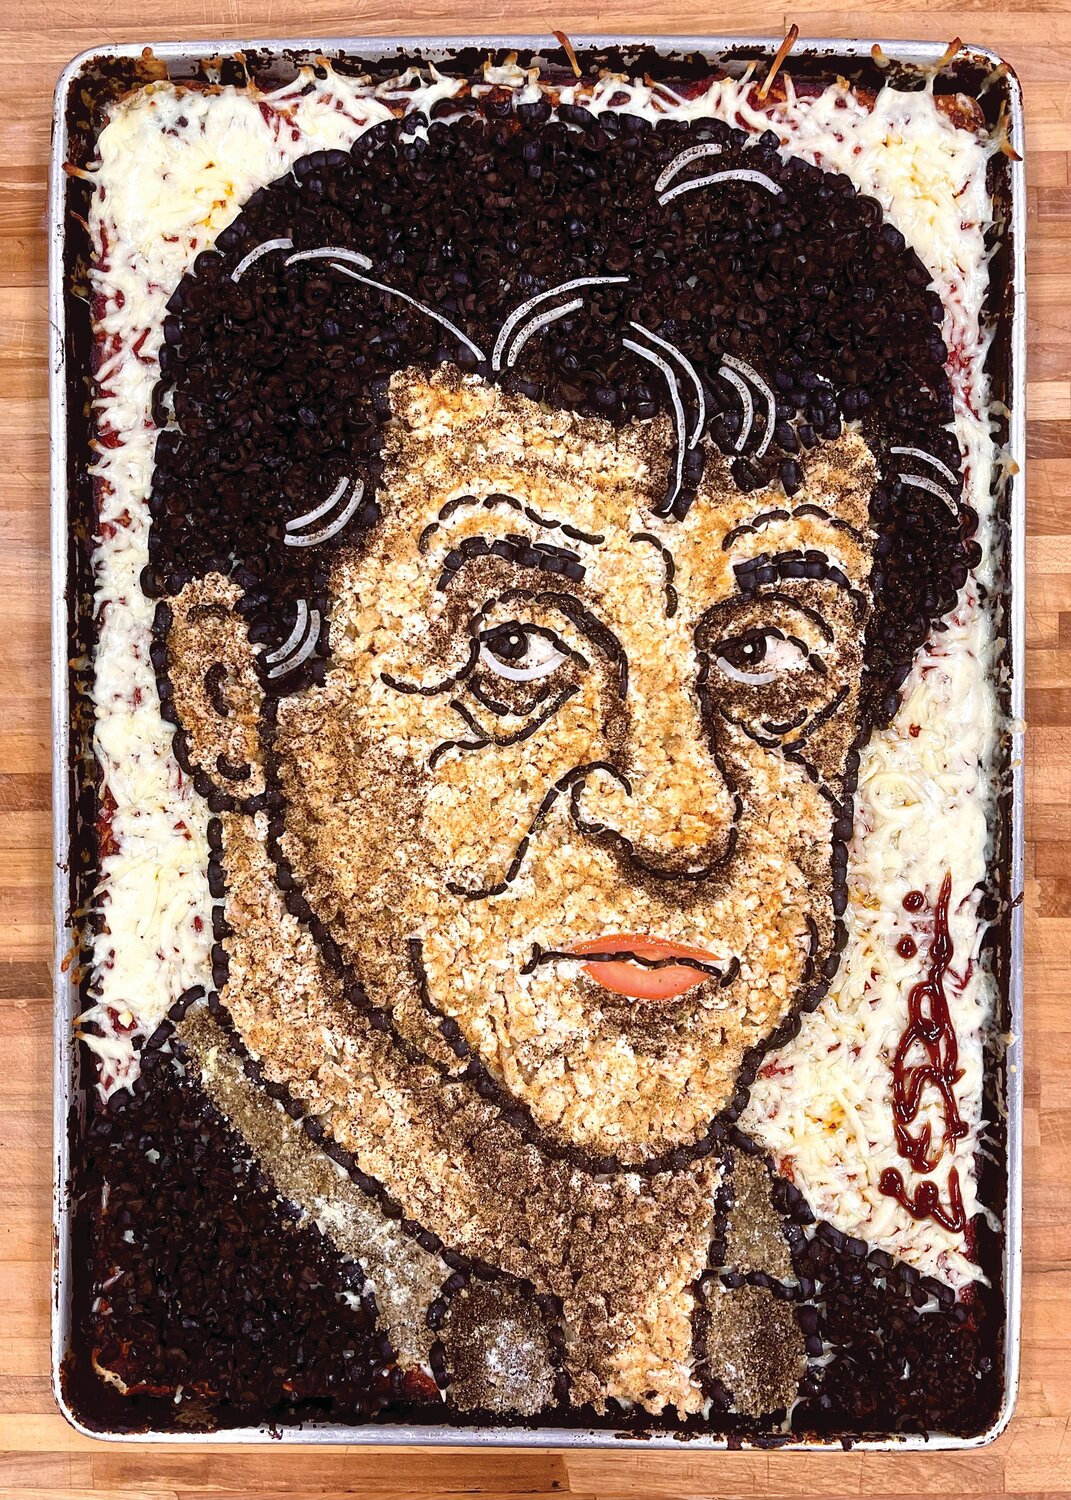 PIZZA ART: Eric Palmieri crafts portraits with pizza. He’s tackled an array of subjects from action star Sylvester Stallone to late Fall River murderess Lizzie Borden, to pizza reviewer and Barstool Sports magnate Dave Portnoy. (Submitted photo)